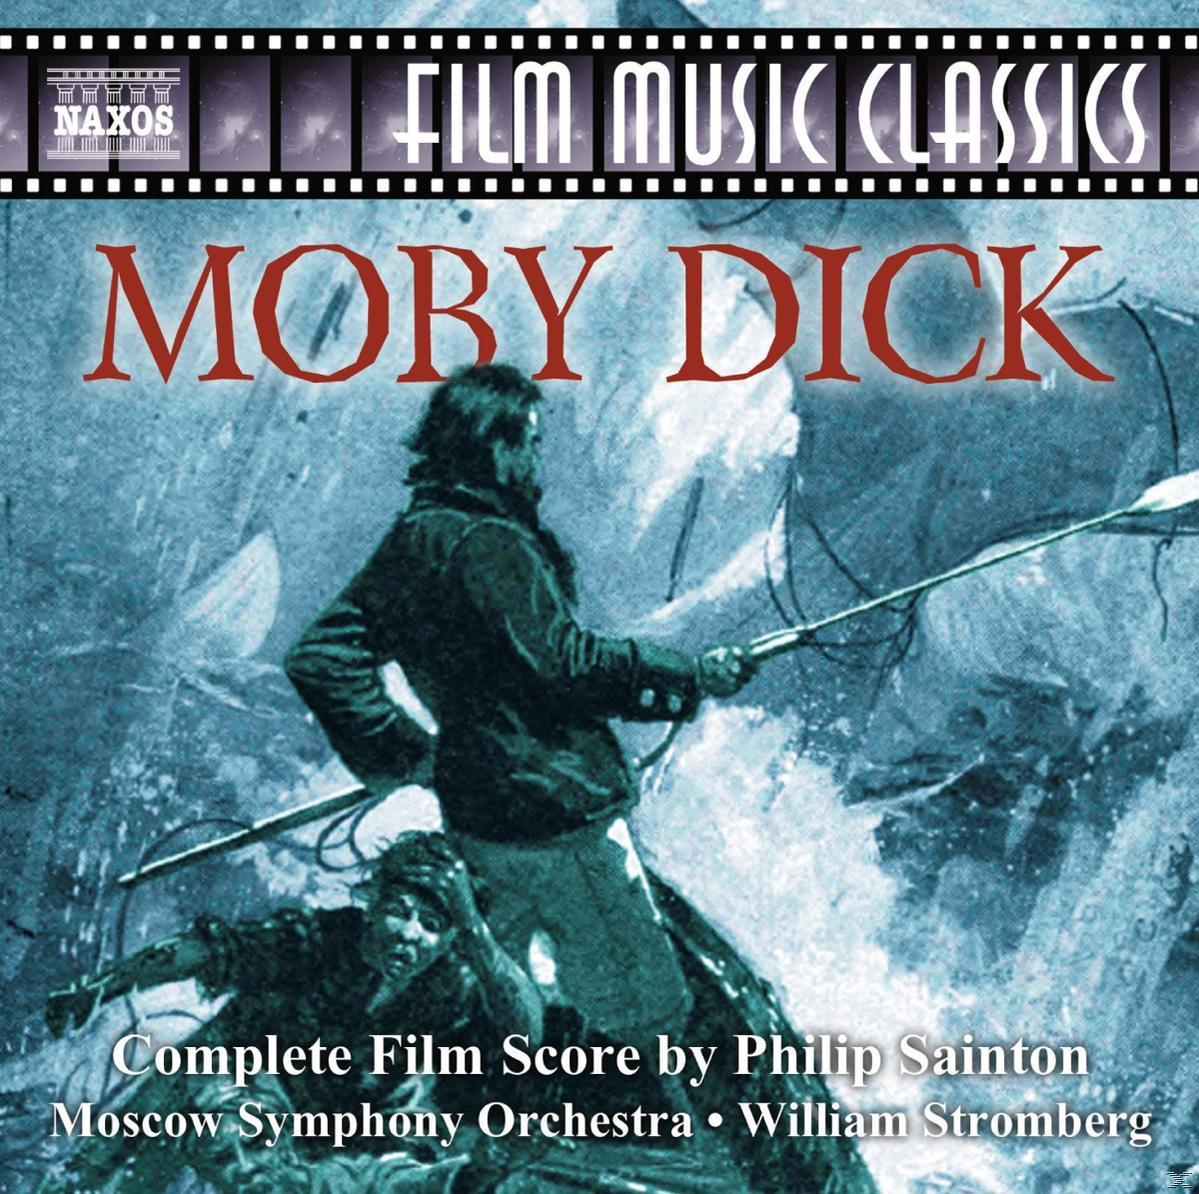 DICK MOBY (CD) Moscow Orchestra - - Symphony